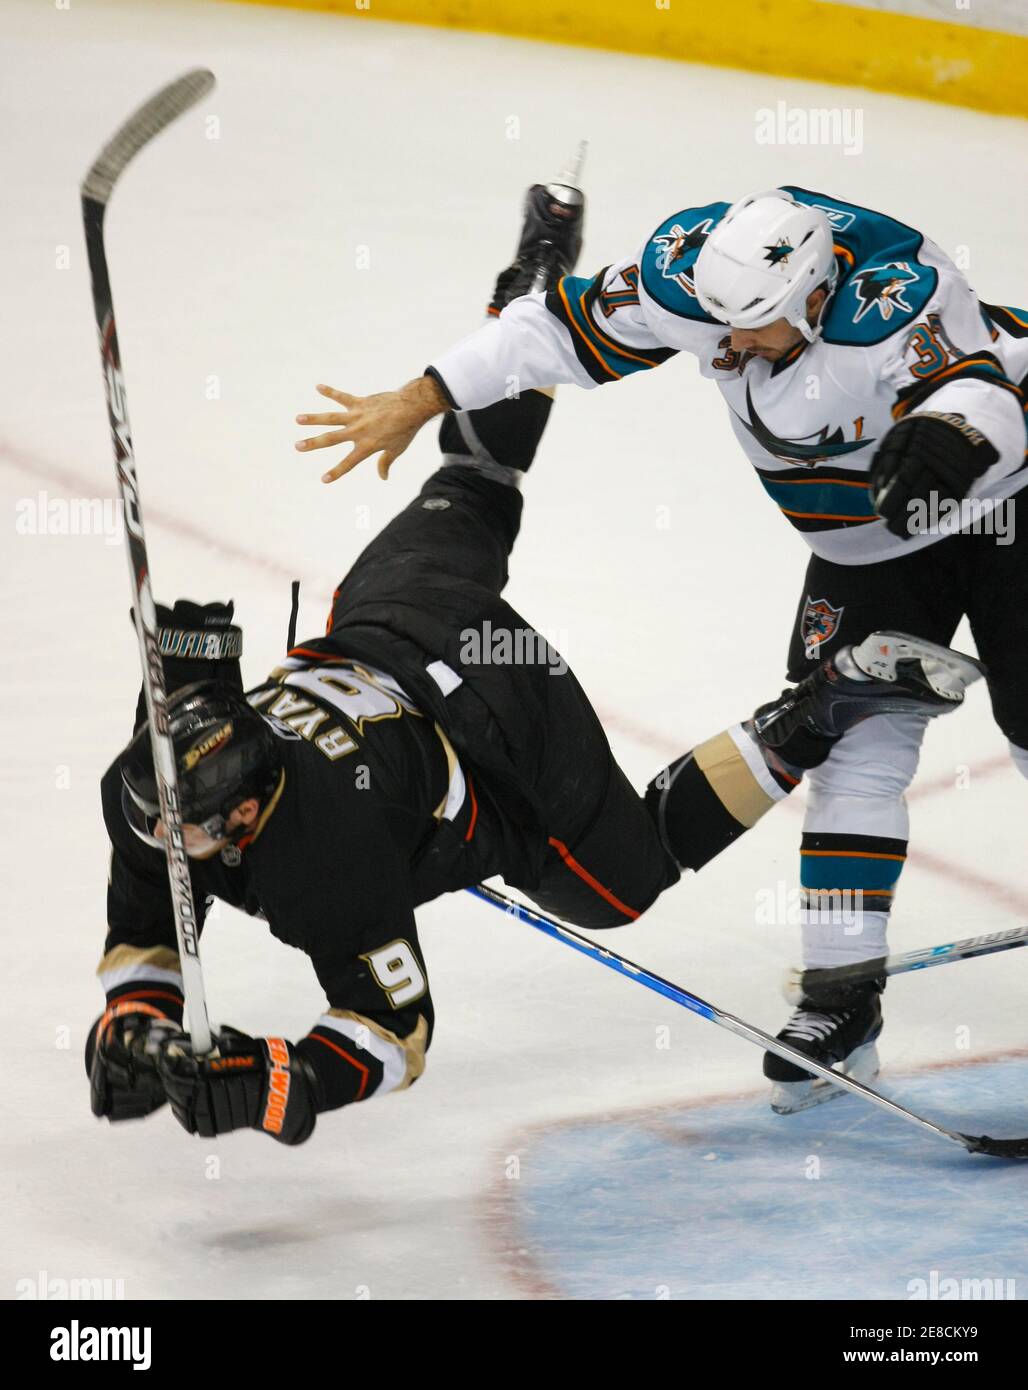 Anaheim Ducks right wing Bobby Ryan is hit to the ice by San Jose Sharks defenseman Brad Lukowich during the first period of Game 4 of the NHL Western Conference hockey playoffs in Anaheim, California April 23, 2009.   REUTERS/Mike Blake  (UNITED STATES SPORT ICE HOCKEY) Stock Photo